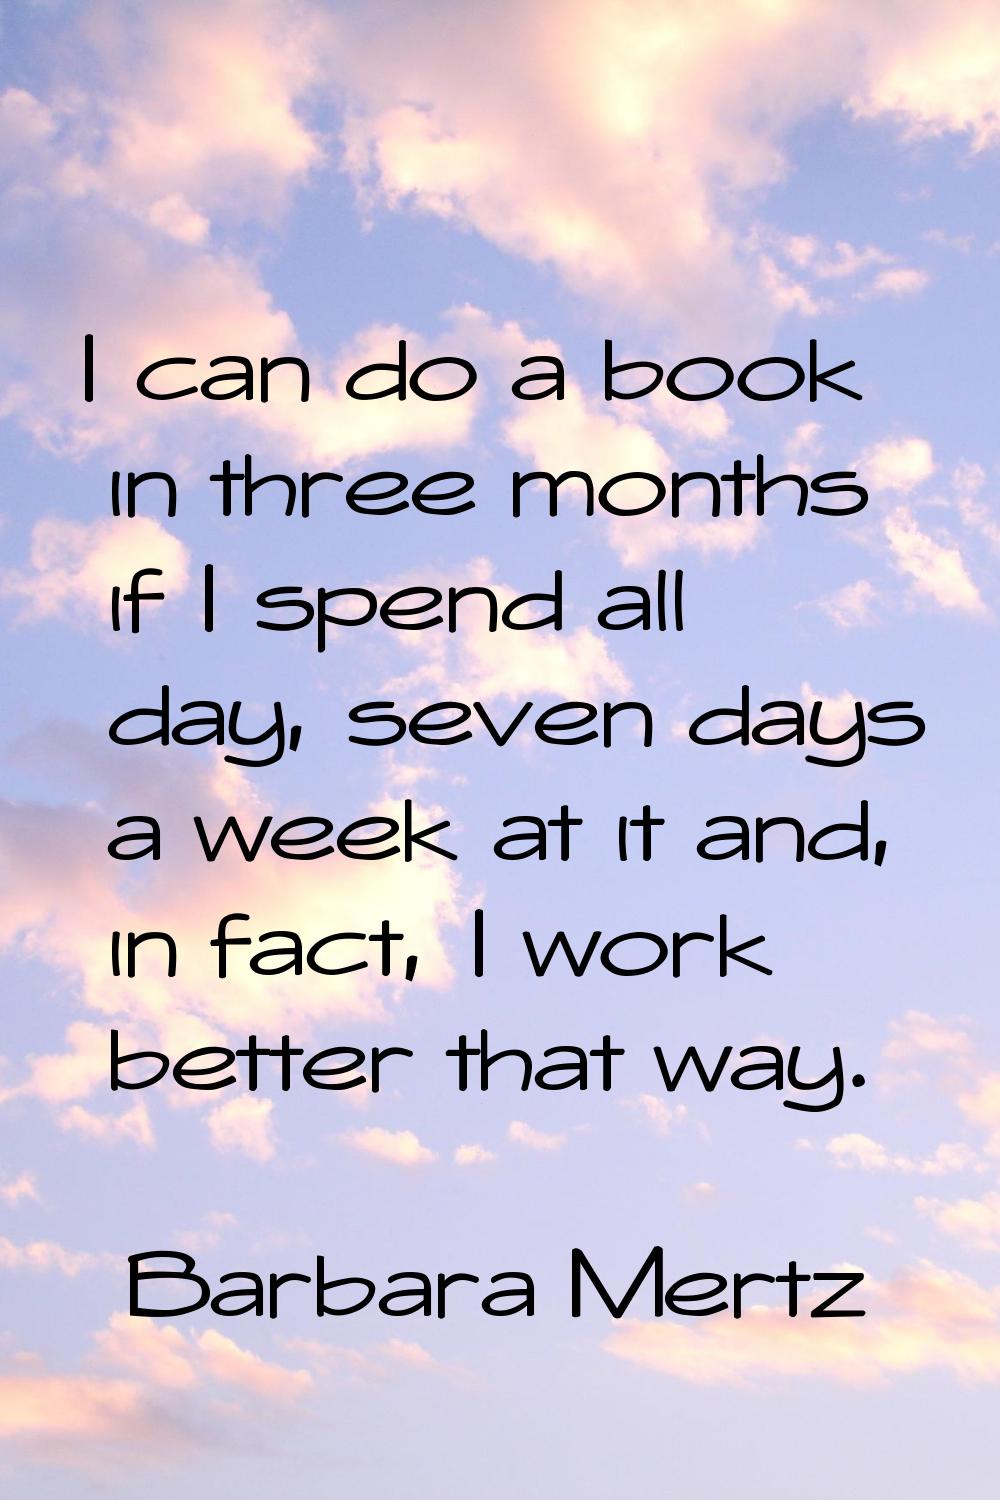 I can do a book in three months if I spend all day, seven days a week at it and, in fact, I work be